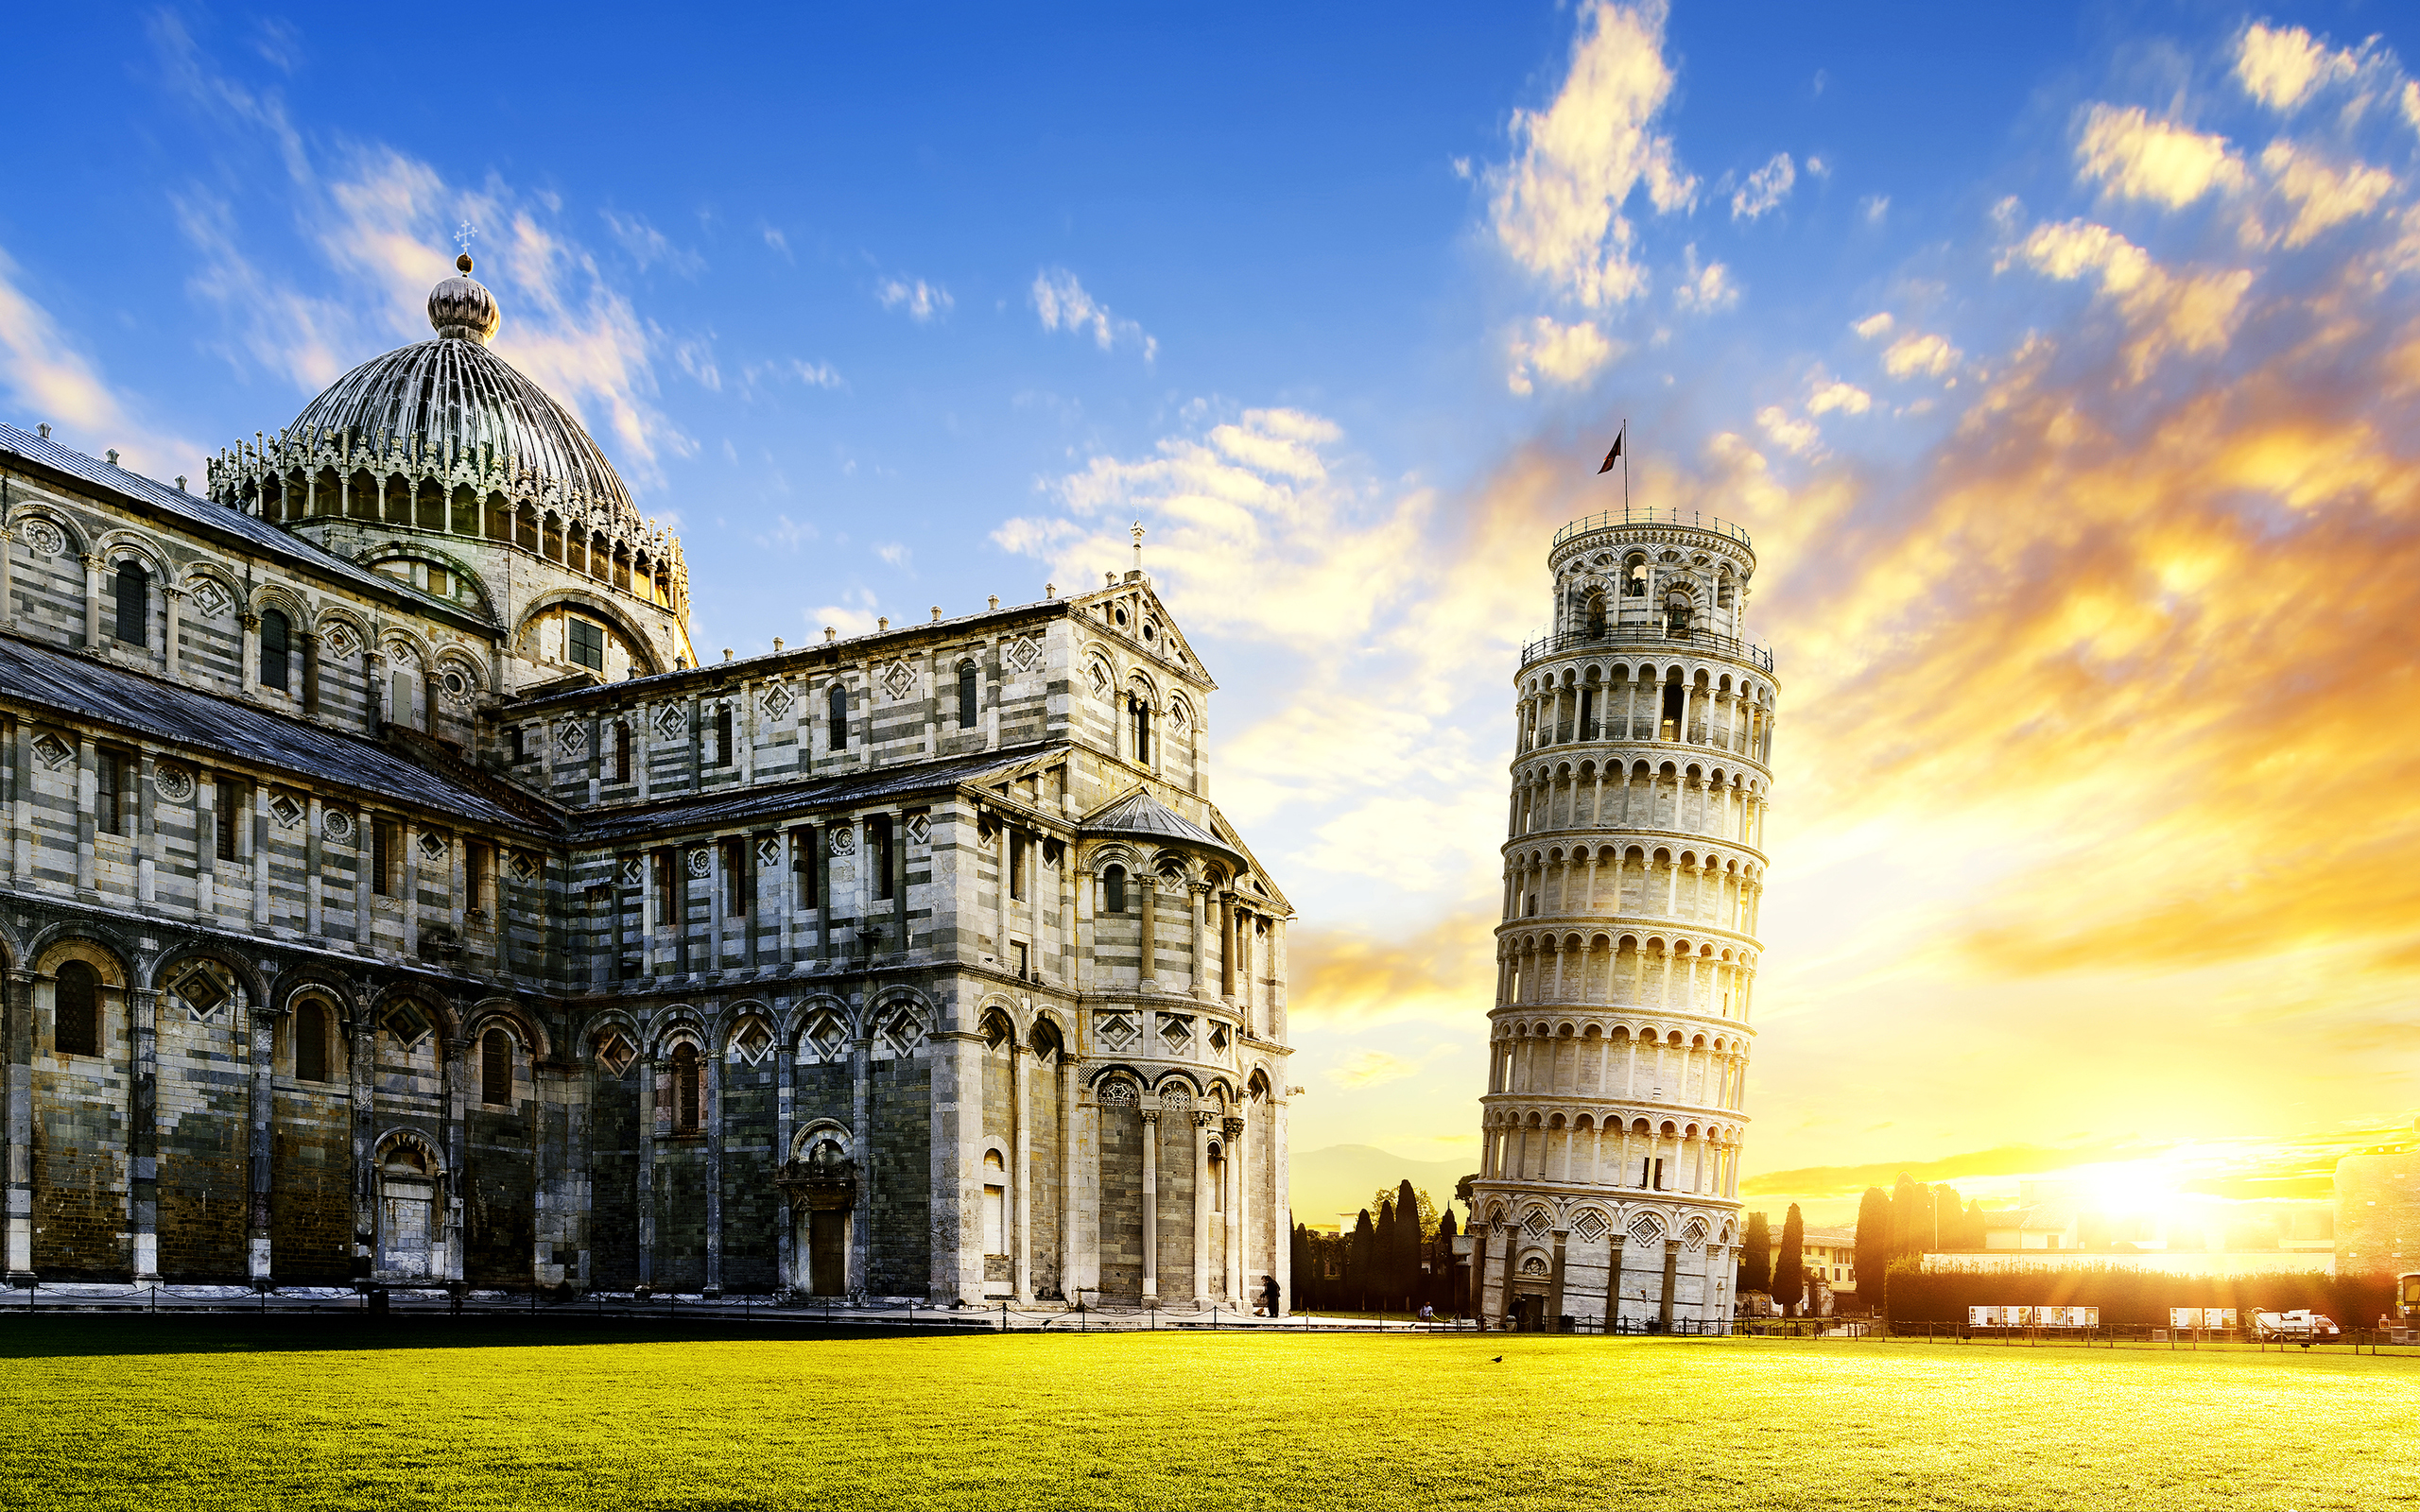 Man Made Leaning Tower Of Pisa HD Wallpaper | Background Image